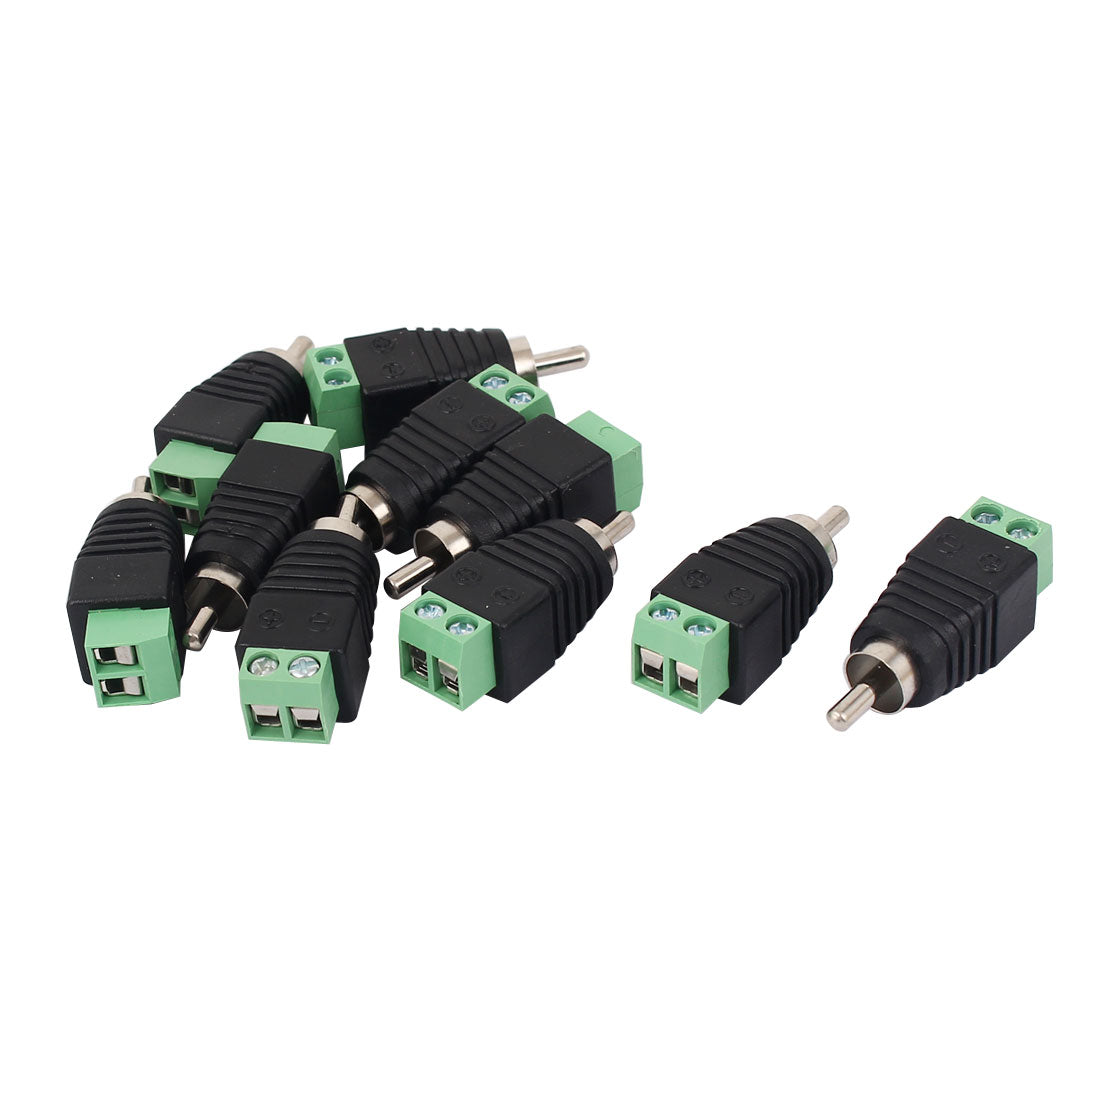 uxcell Uxcell 10pcs UTP Cat5 Cat6 Cable to AV Phono RCA Male Jack Connector Adapter for CCTV